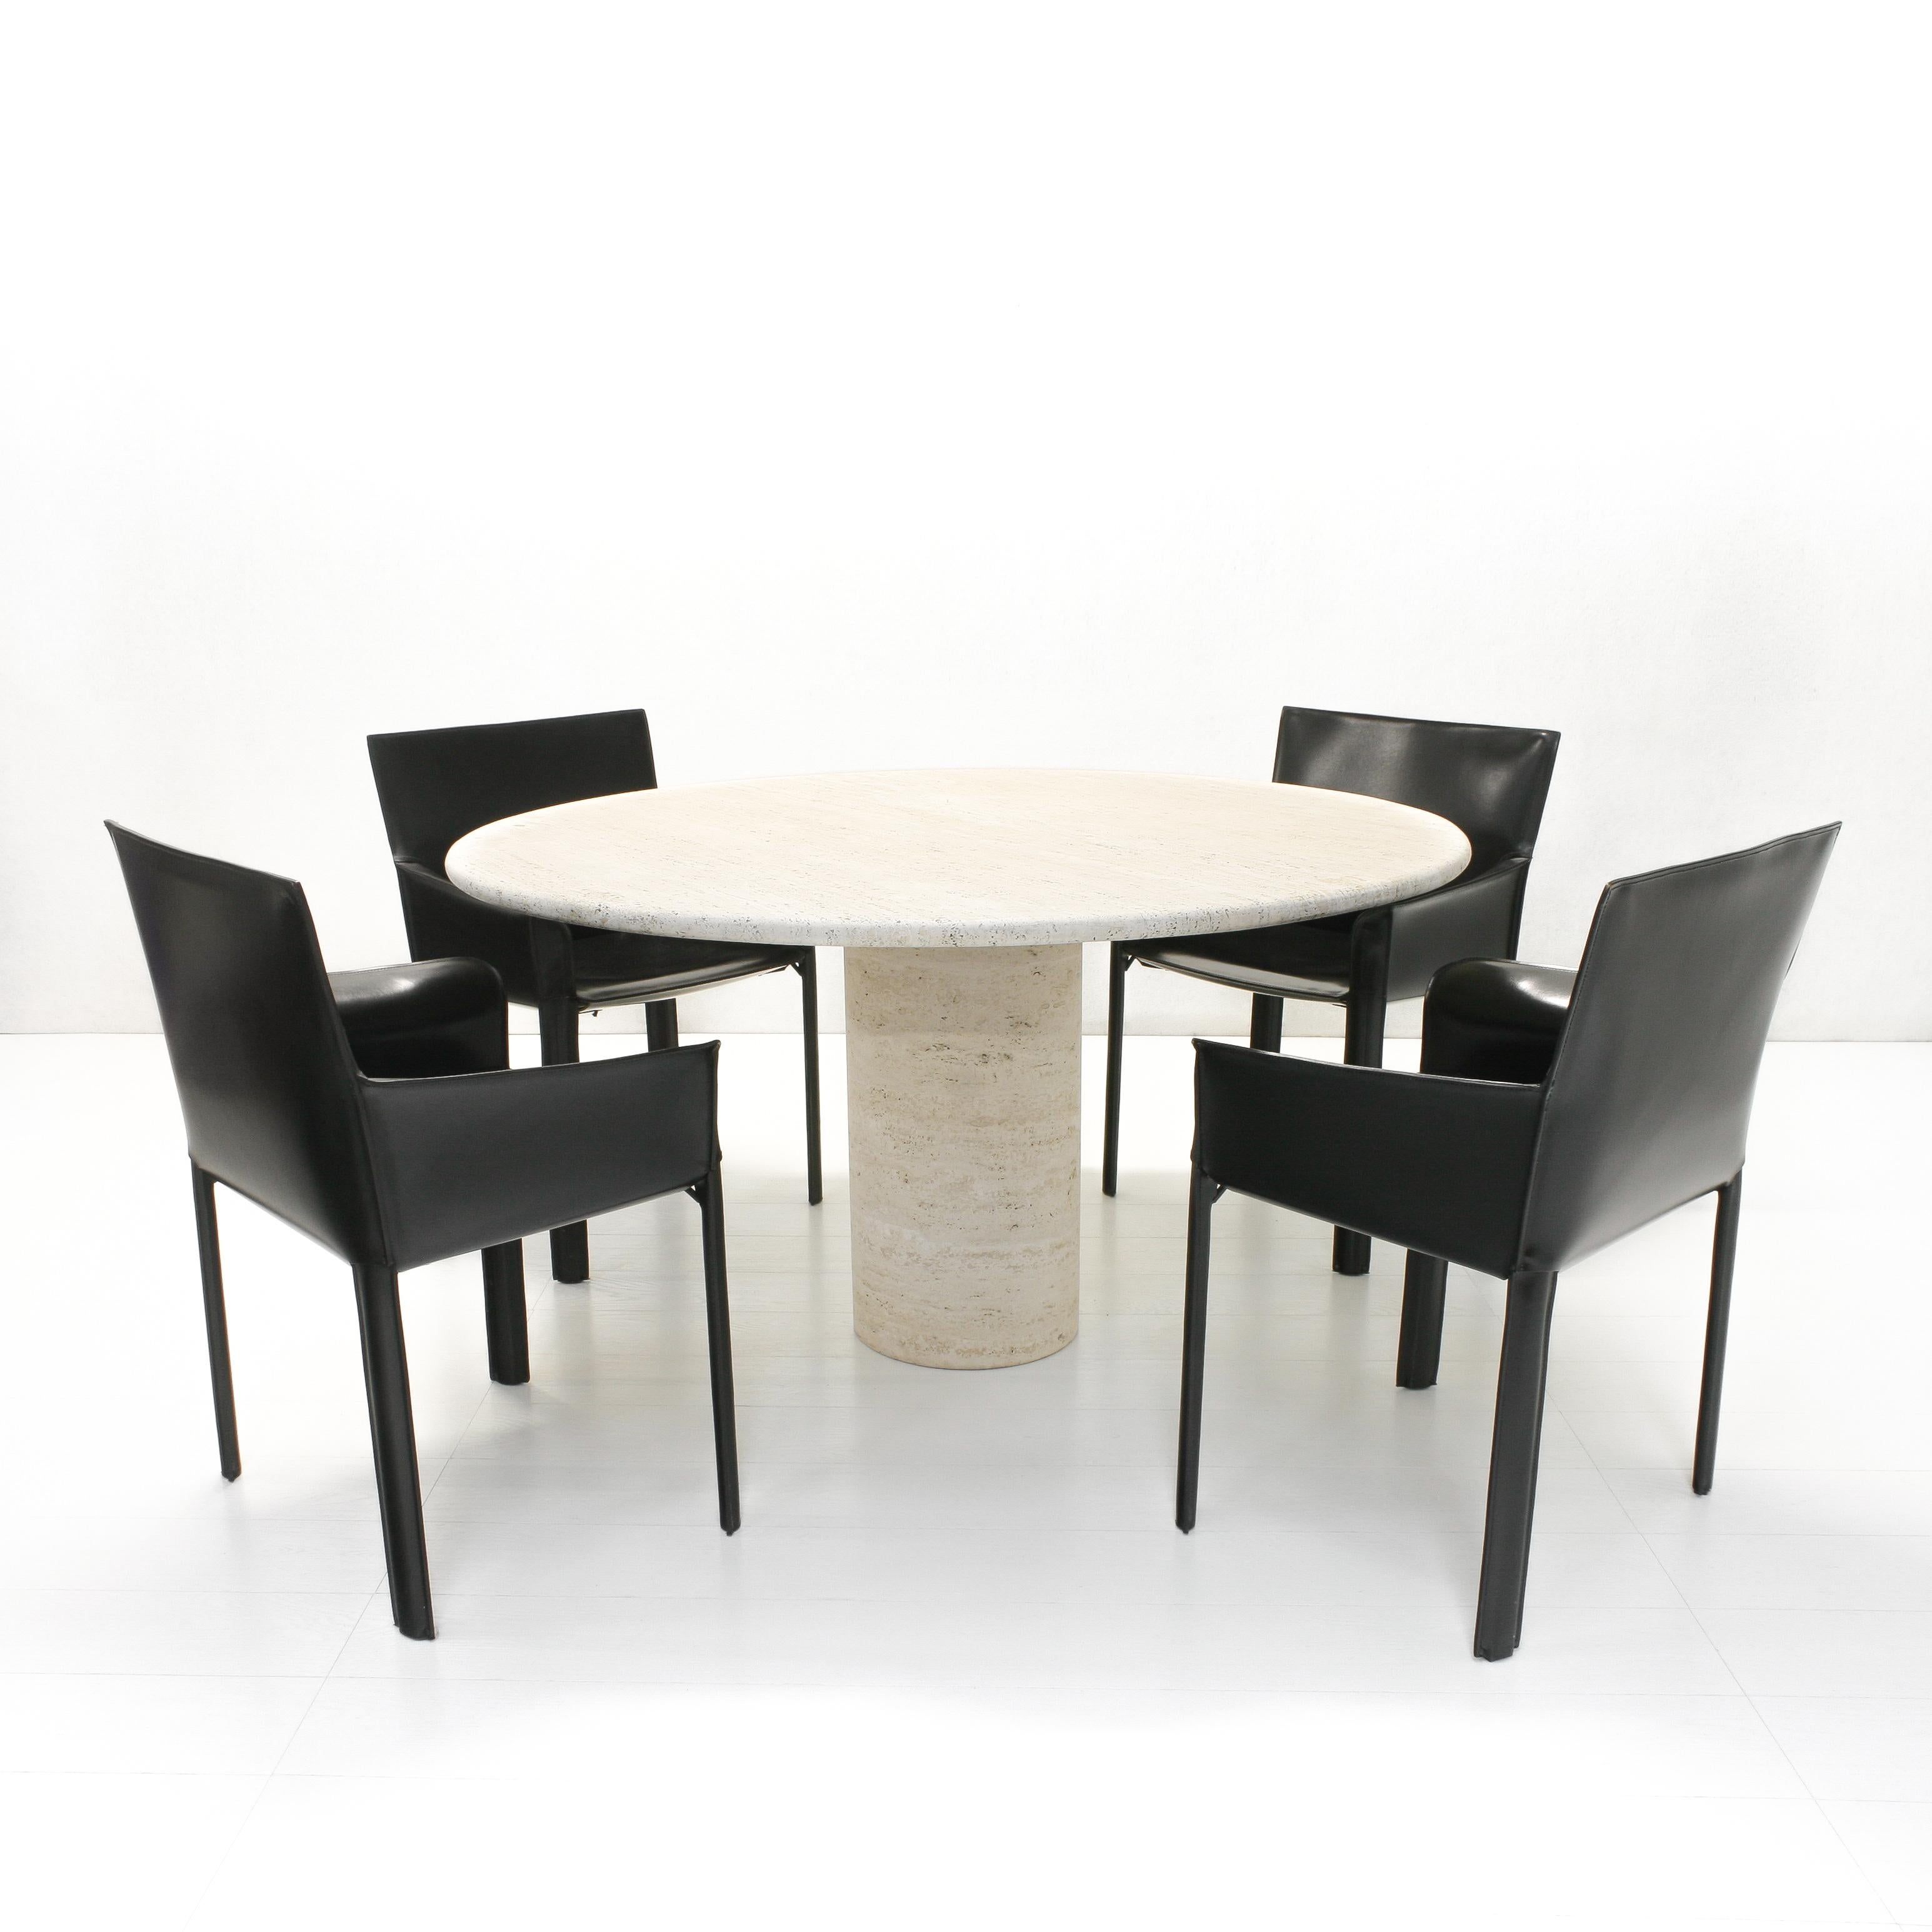 This large stylish Italian travertine dining table has a robust look with a beautiful, subtle texture created by the partially open structure limestone.
The hollow cylindrical stand can be turned around to created a different look.